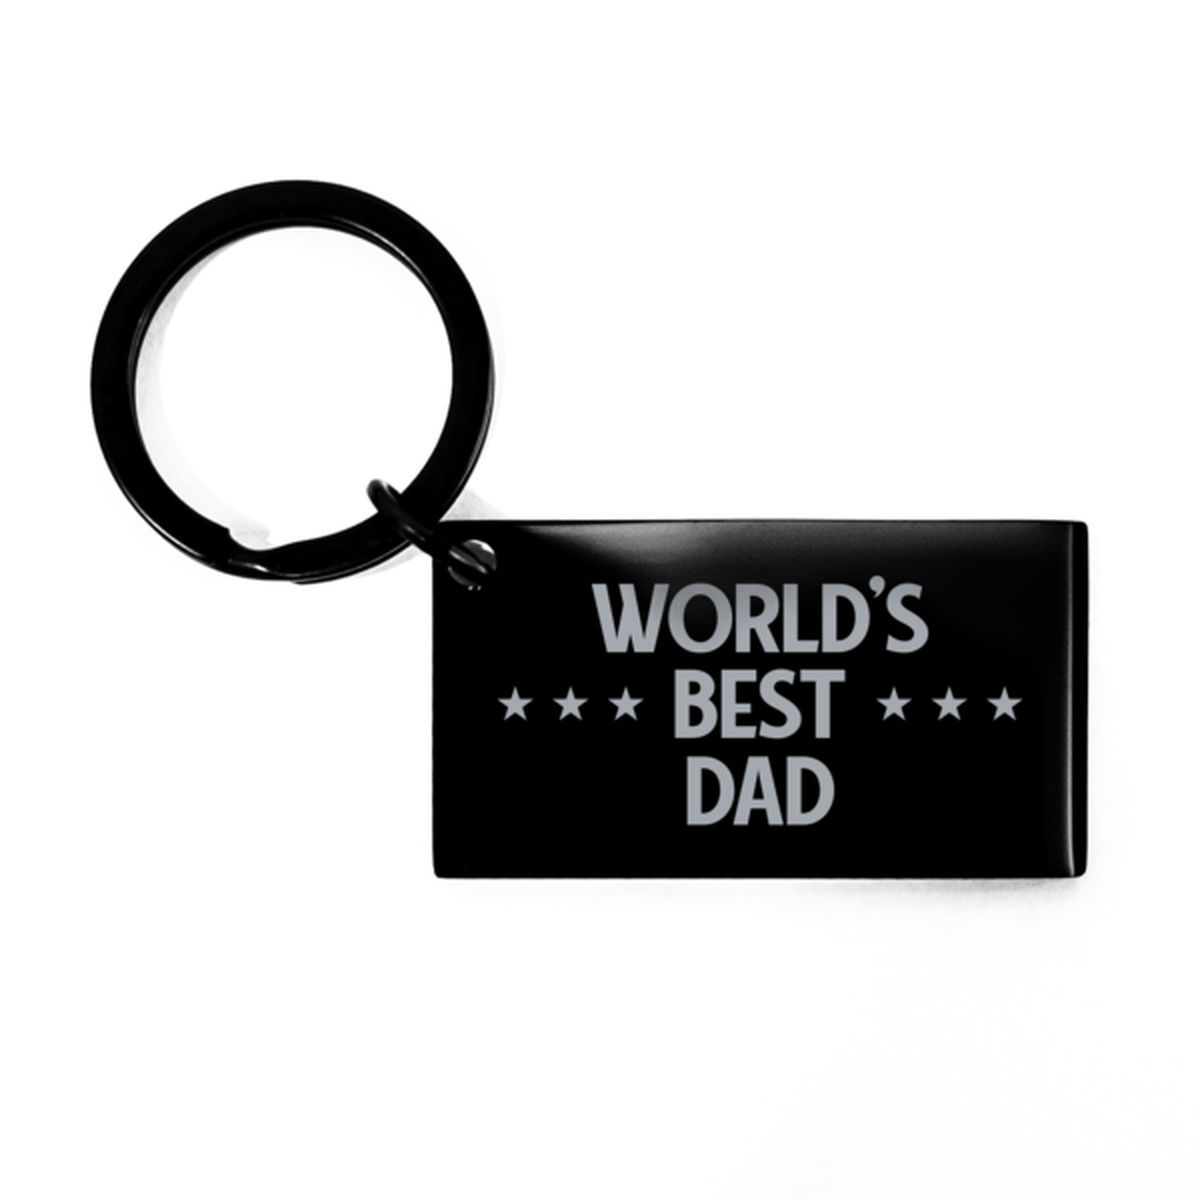 Worlds Best Dad Gifts, Funny Black Engraved Keychain For Dad, Birthday Presents For Men